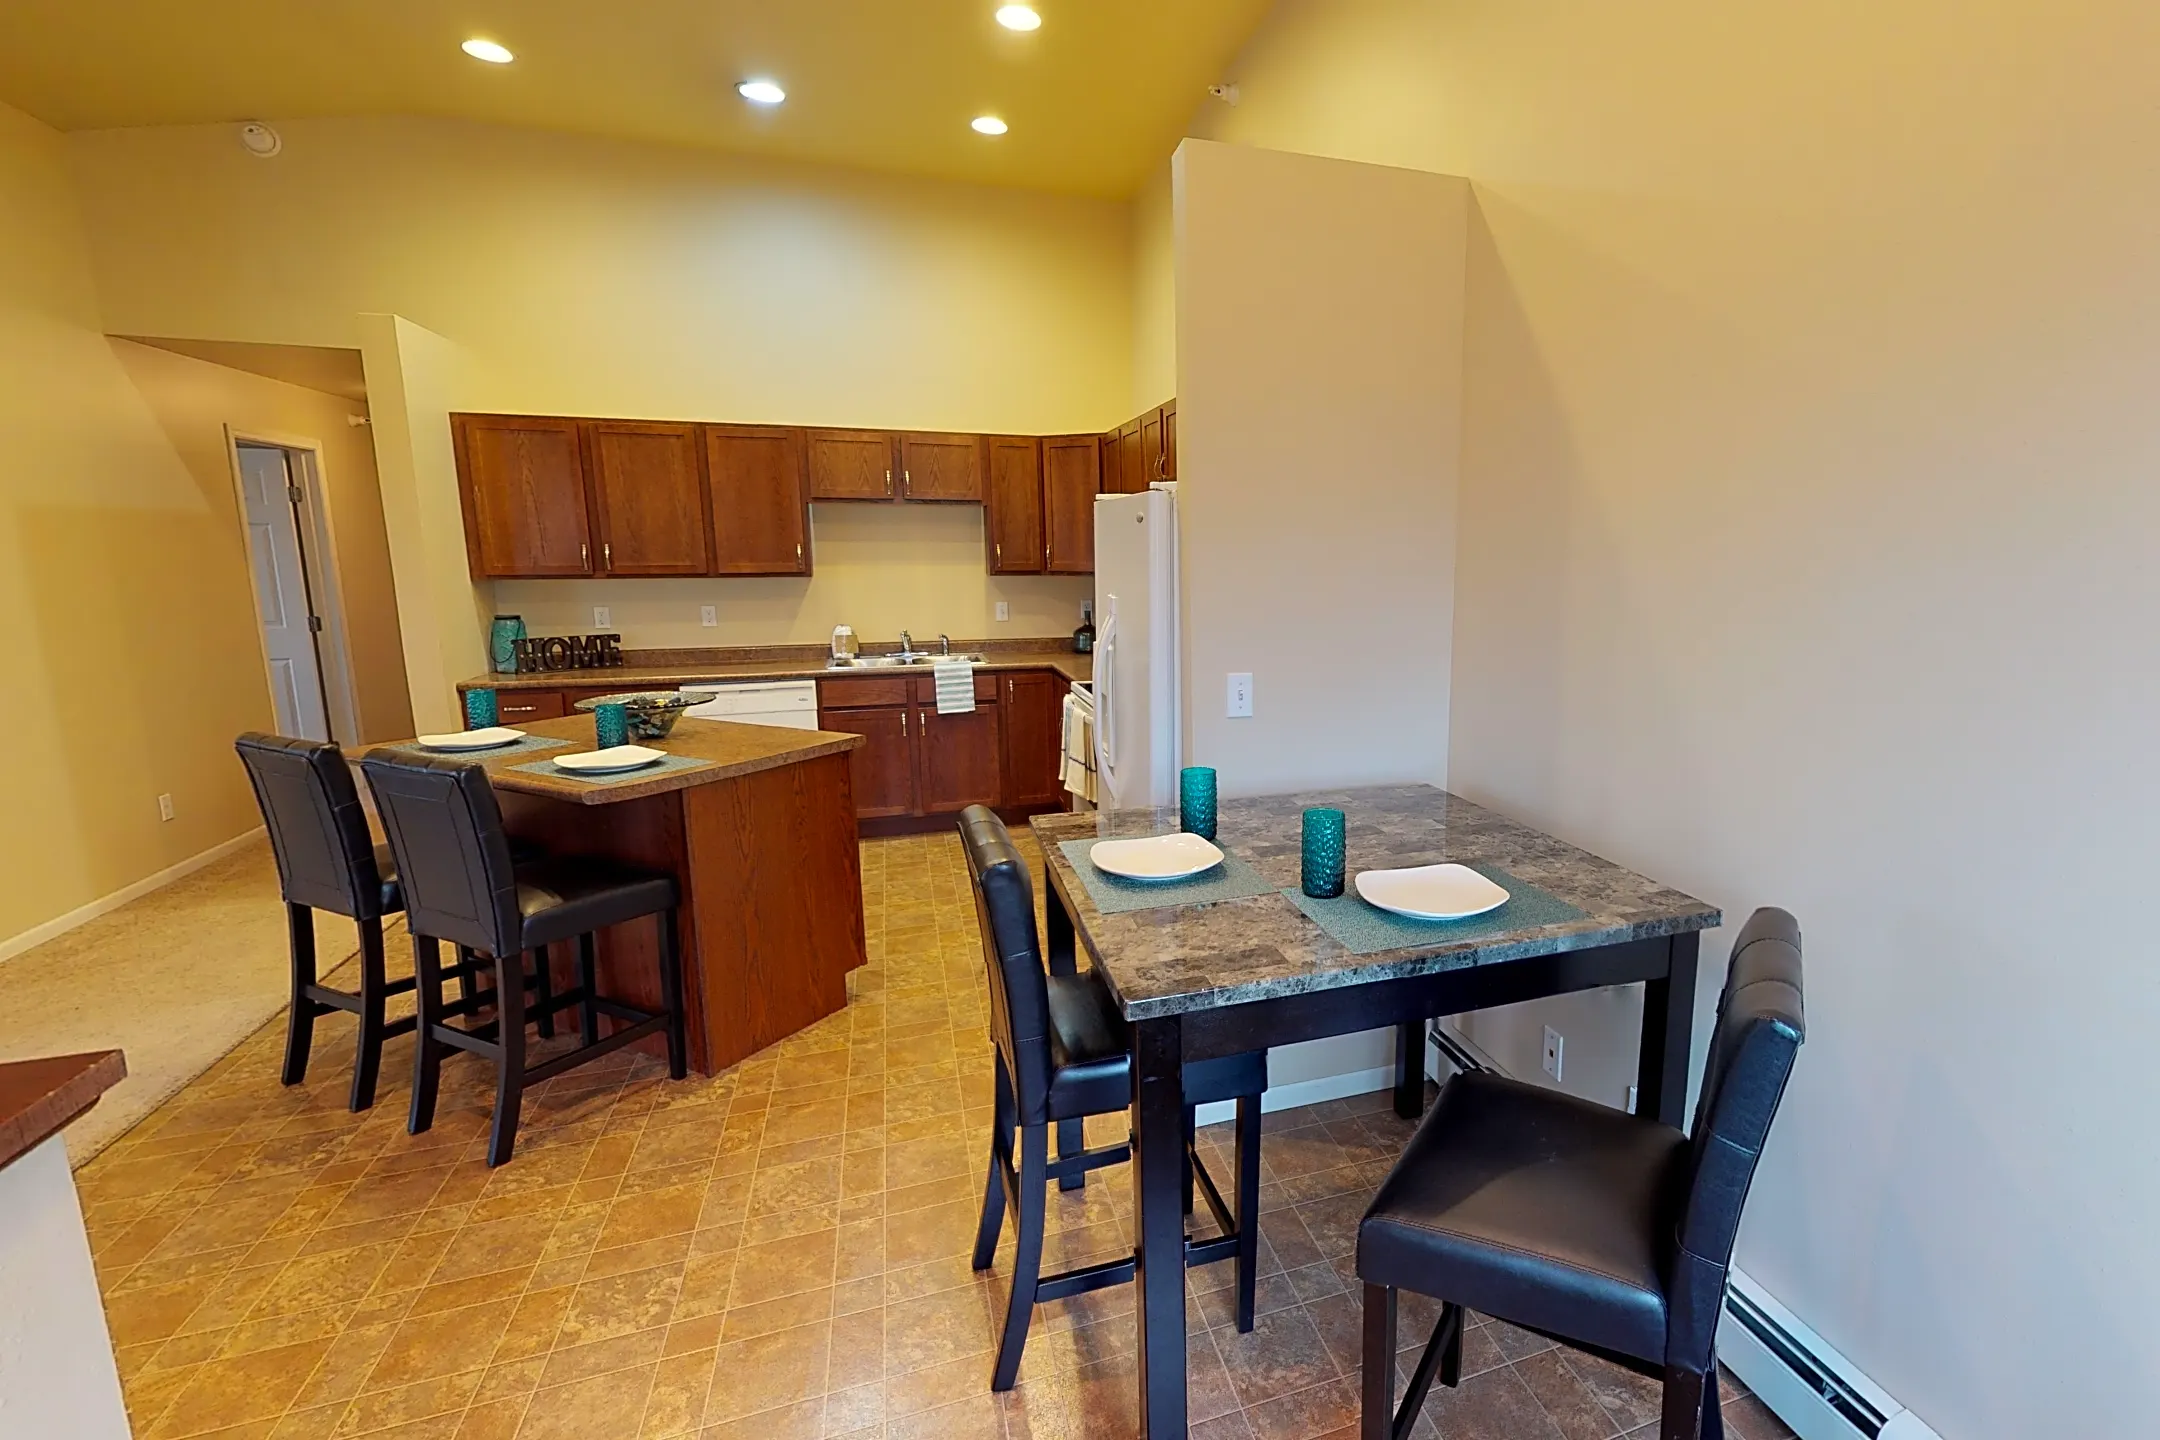 Dining Room - Tuscany Villa Townhomes - West Fargo, ND